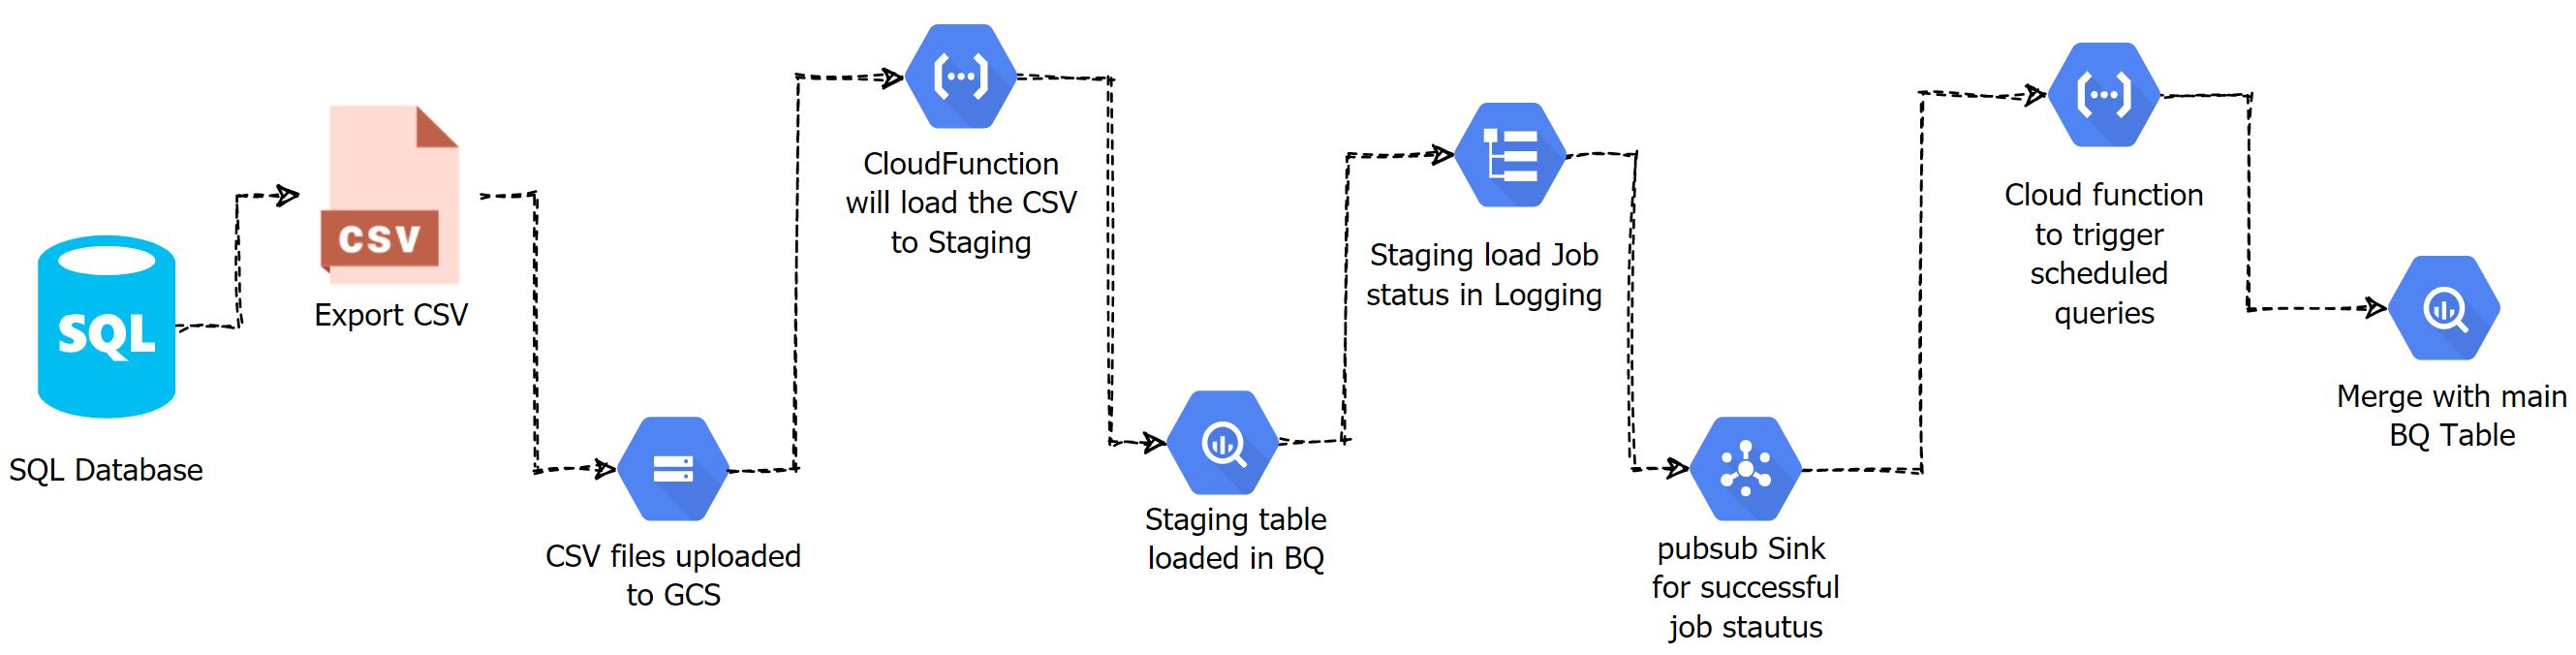 BigQuery Data Pipeline Without Any Orchestrator Just CloudFunction And PubSub%}